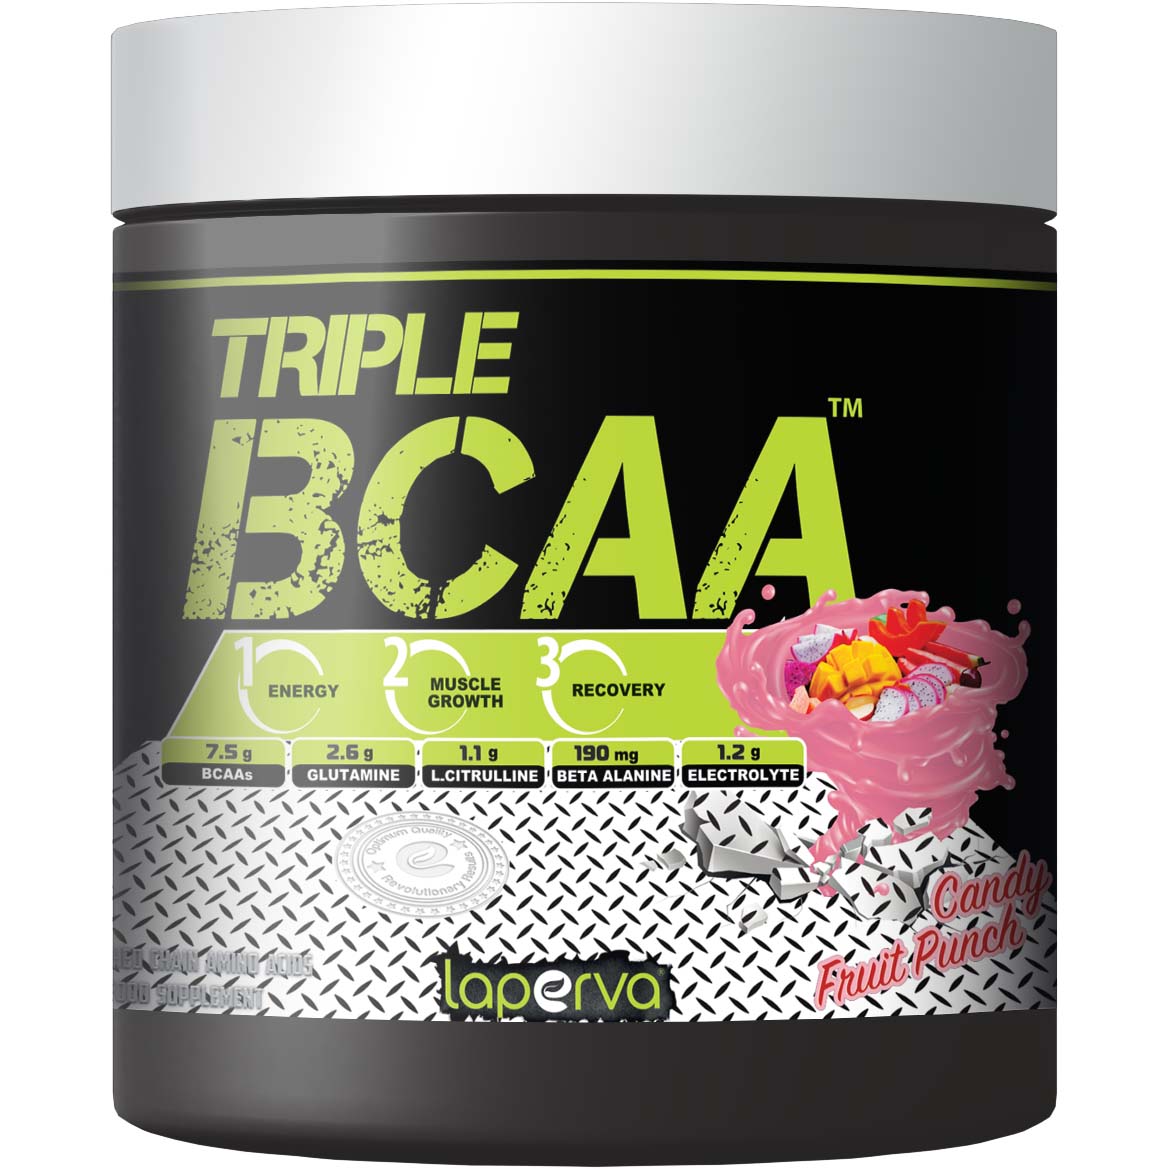 Laperva Triple BCAA, Candy Fruit Punch, 30